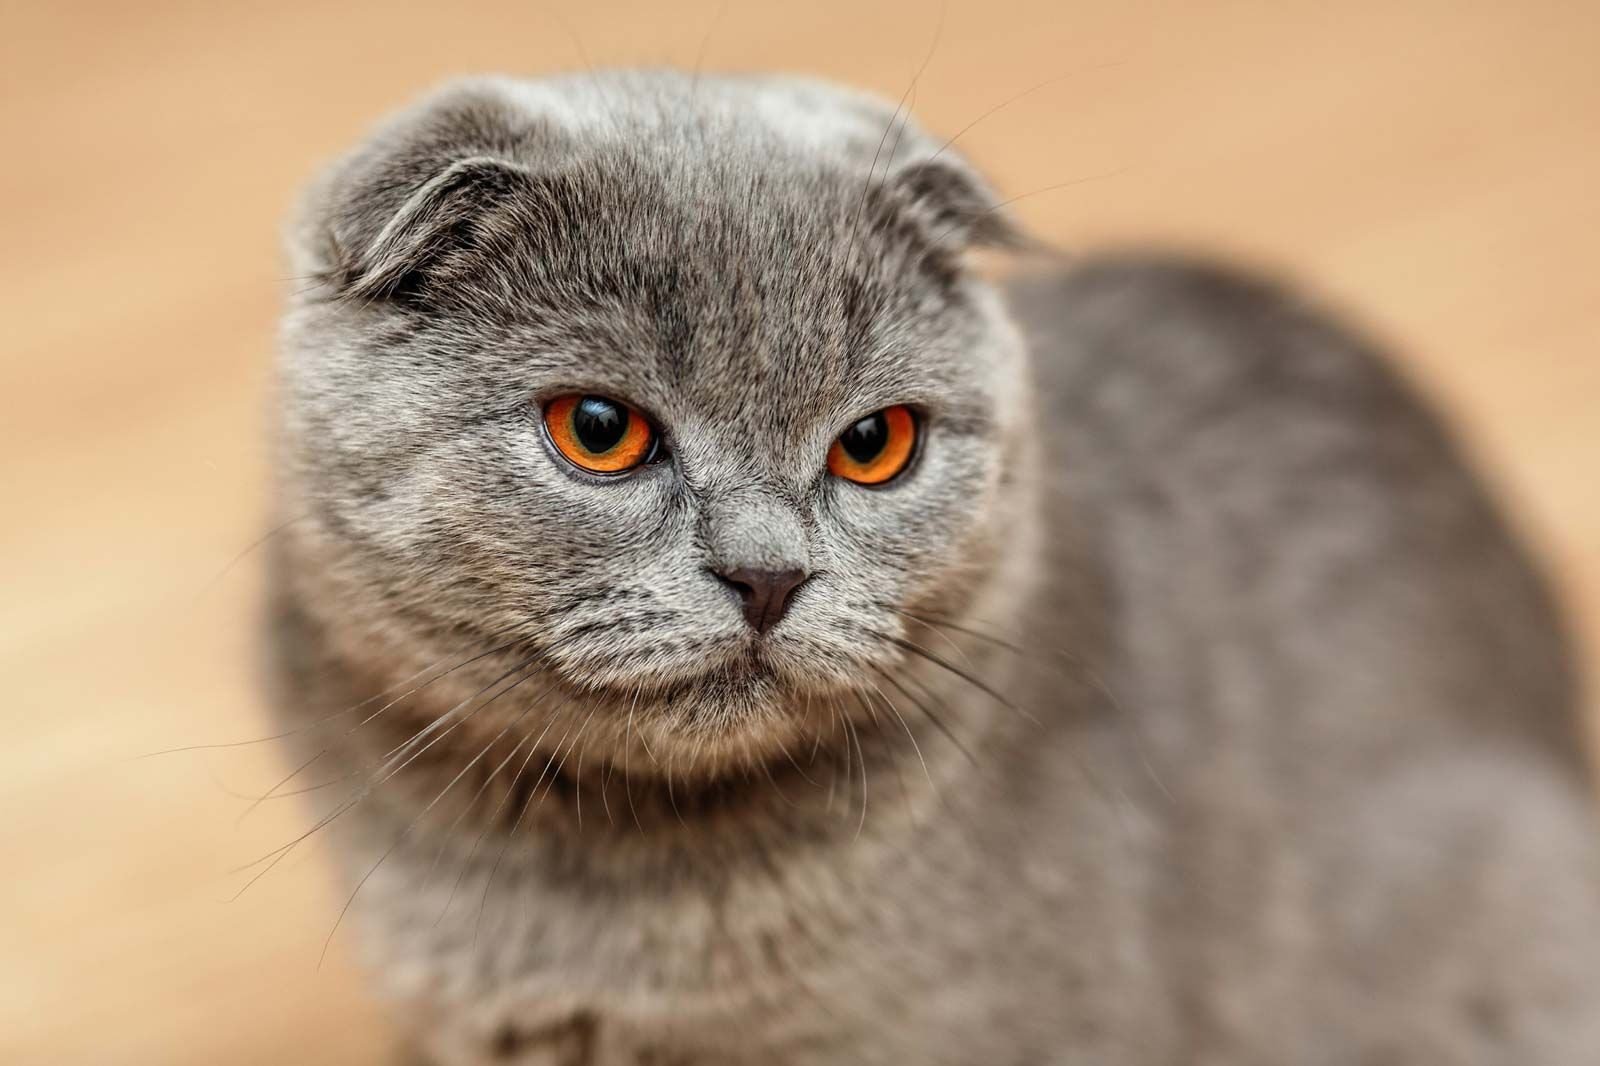 10 Black and White Cat Breeds You Should Know About contain: Scottish Fold